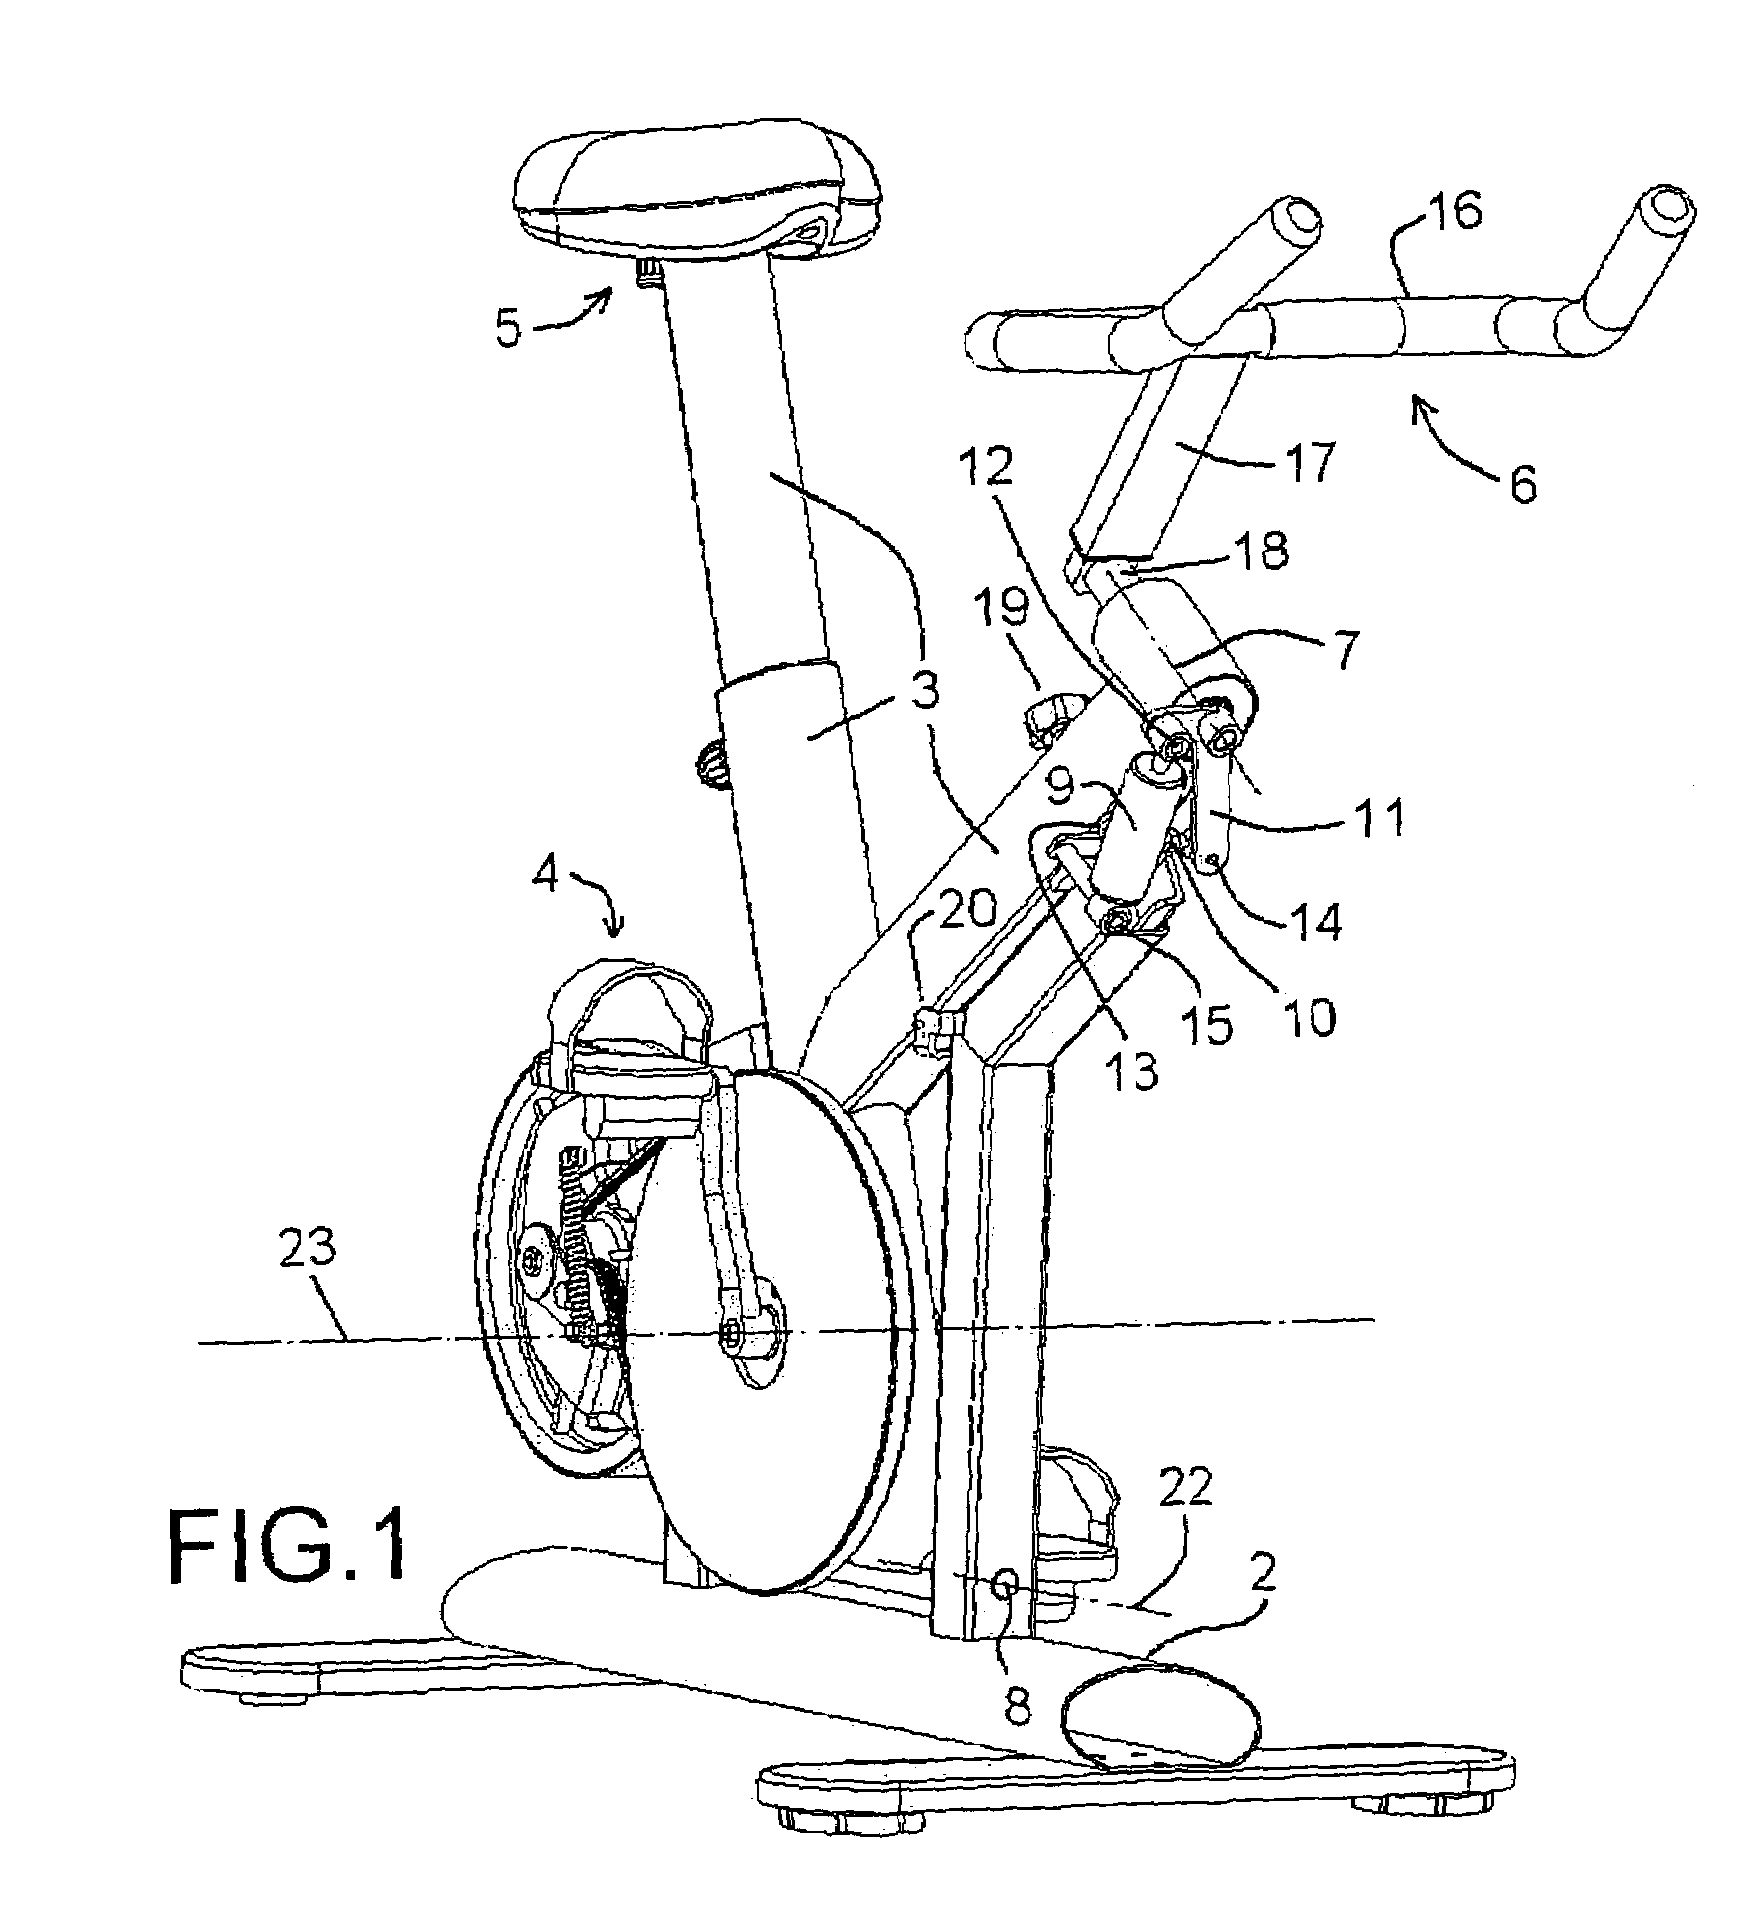 Static pedalling fitness apparatus with lateral swinging